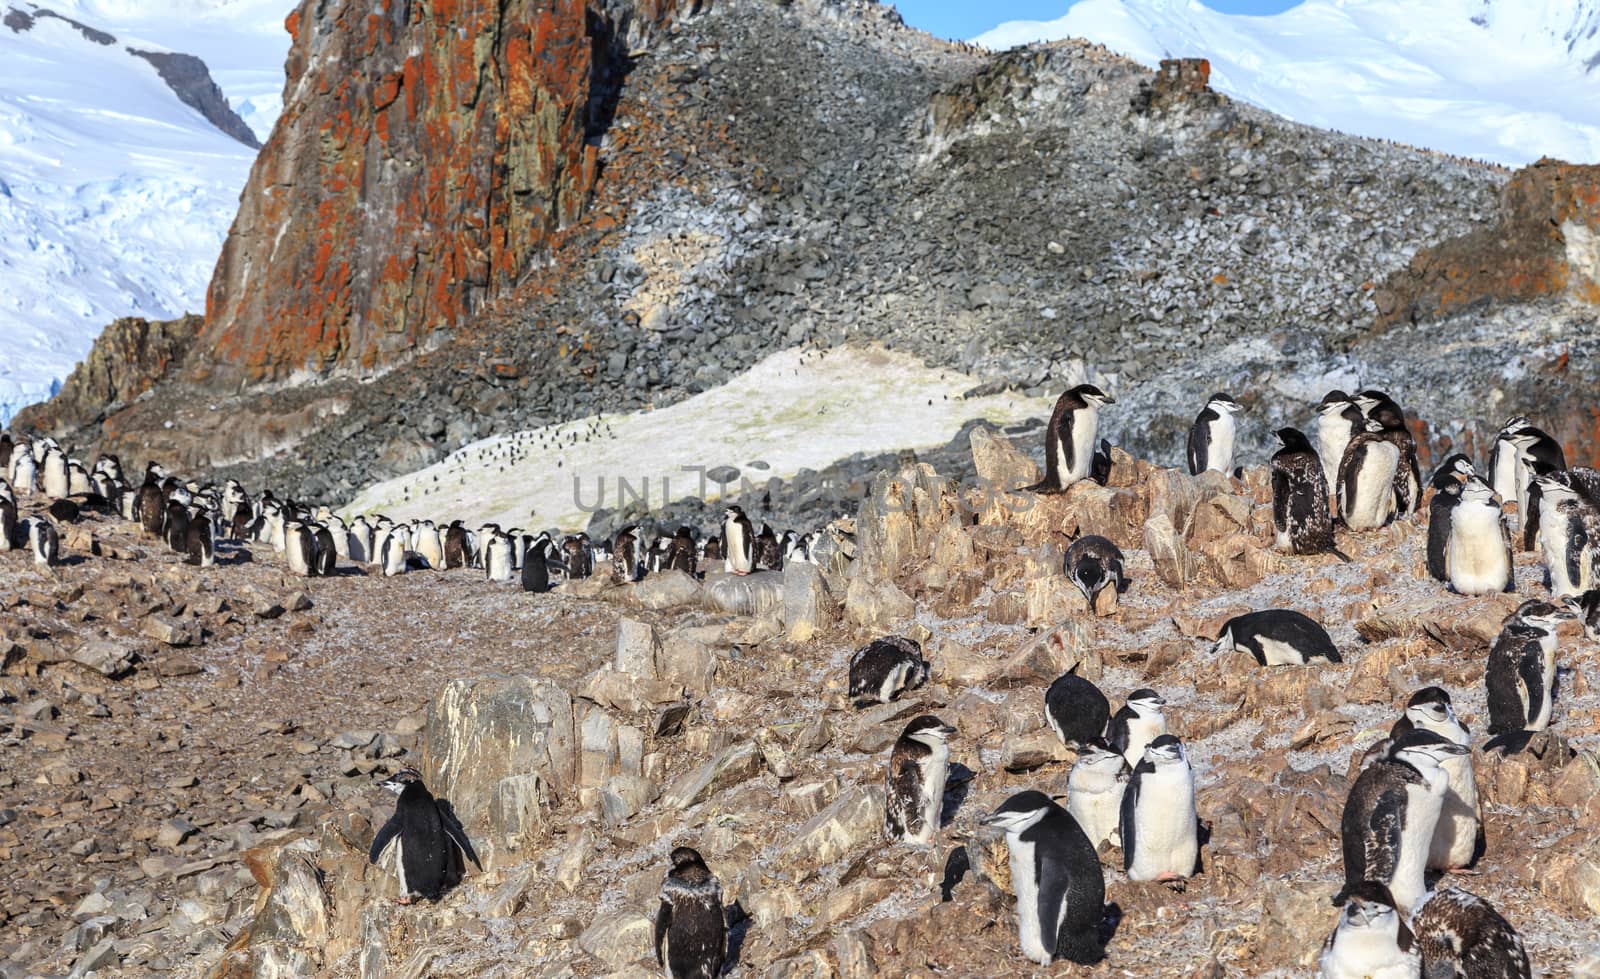 Chinstrap penguins family members gathering on the rocks, Half M by ambeon